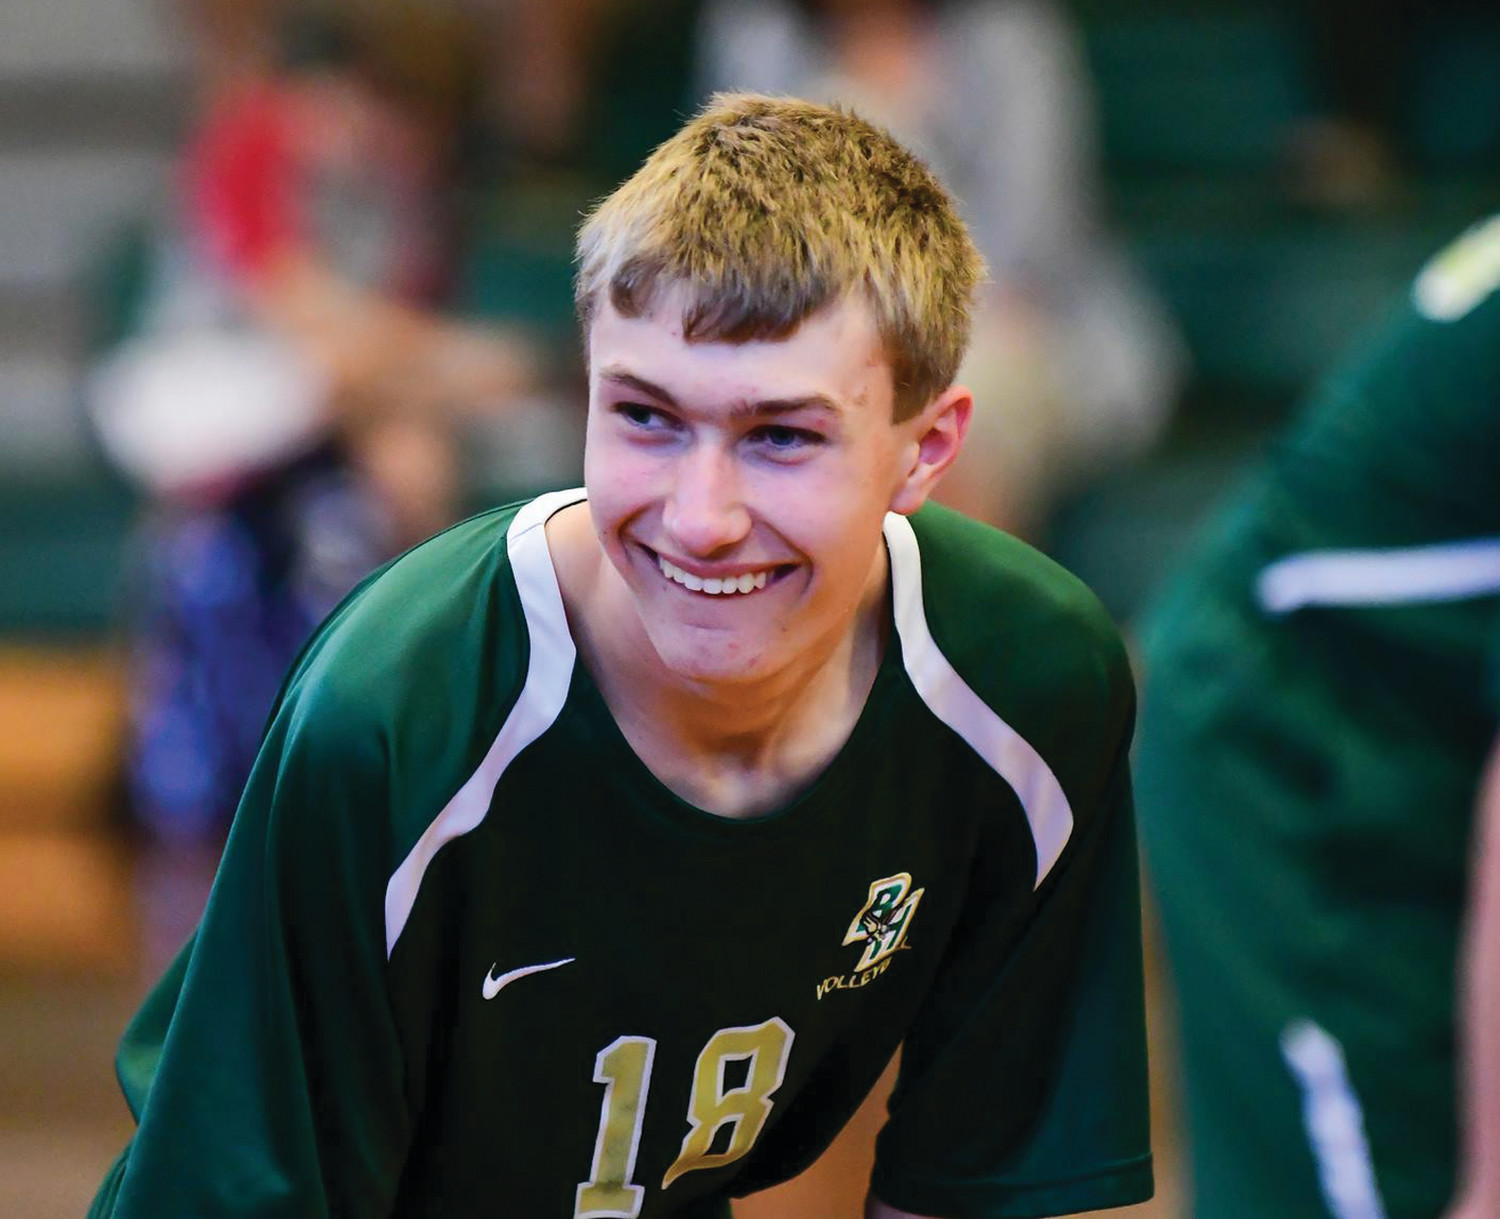 UNIFIED HAWKS: Bishop Hendricken unified volleyball player Michael Castelli during the 2017 season.